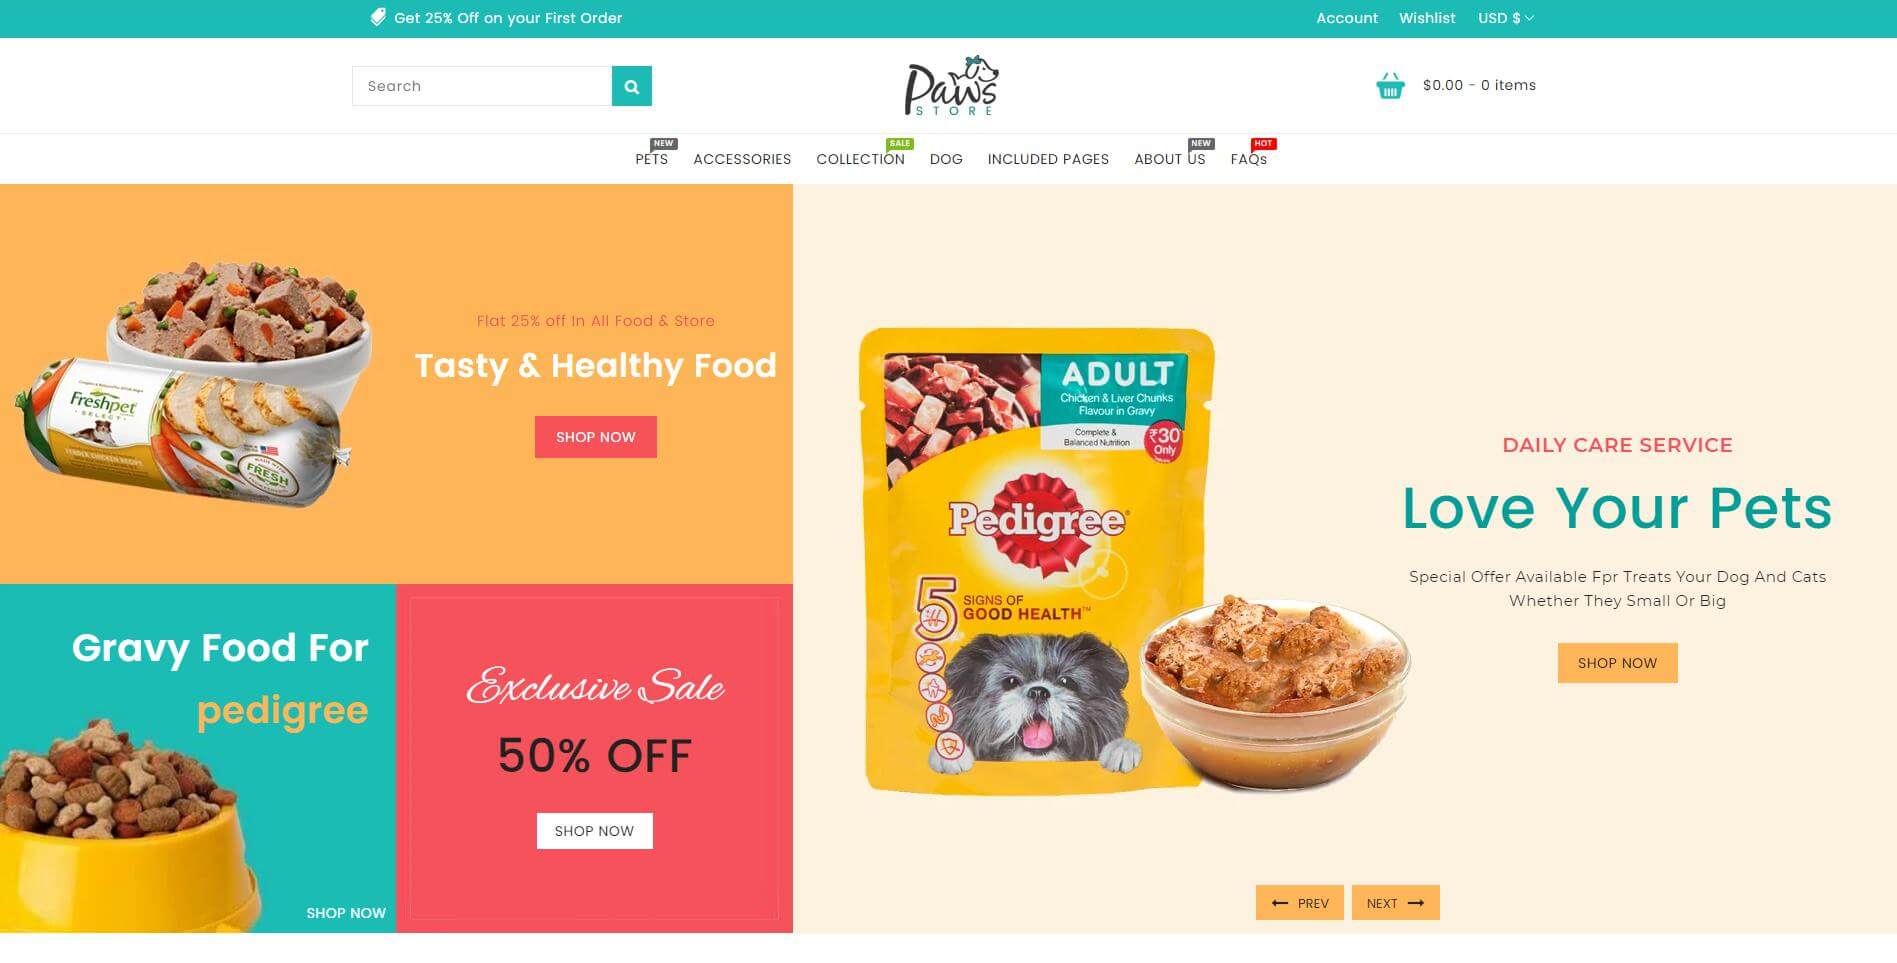 Infinite design options combined with various eCommerce features. Absolutely the best Shopify theme for your pet store!